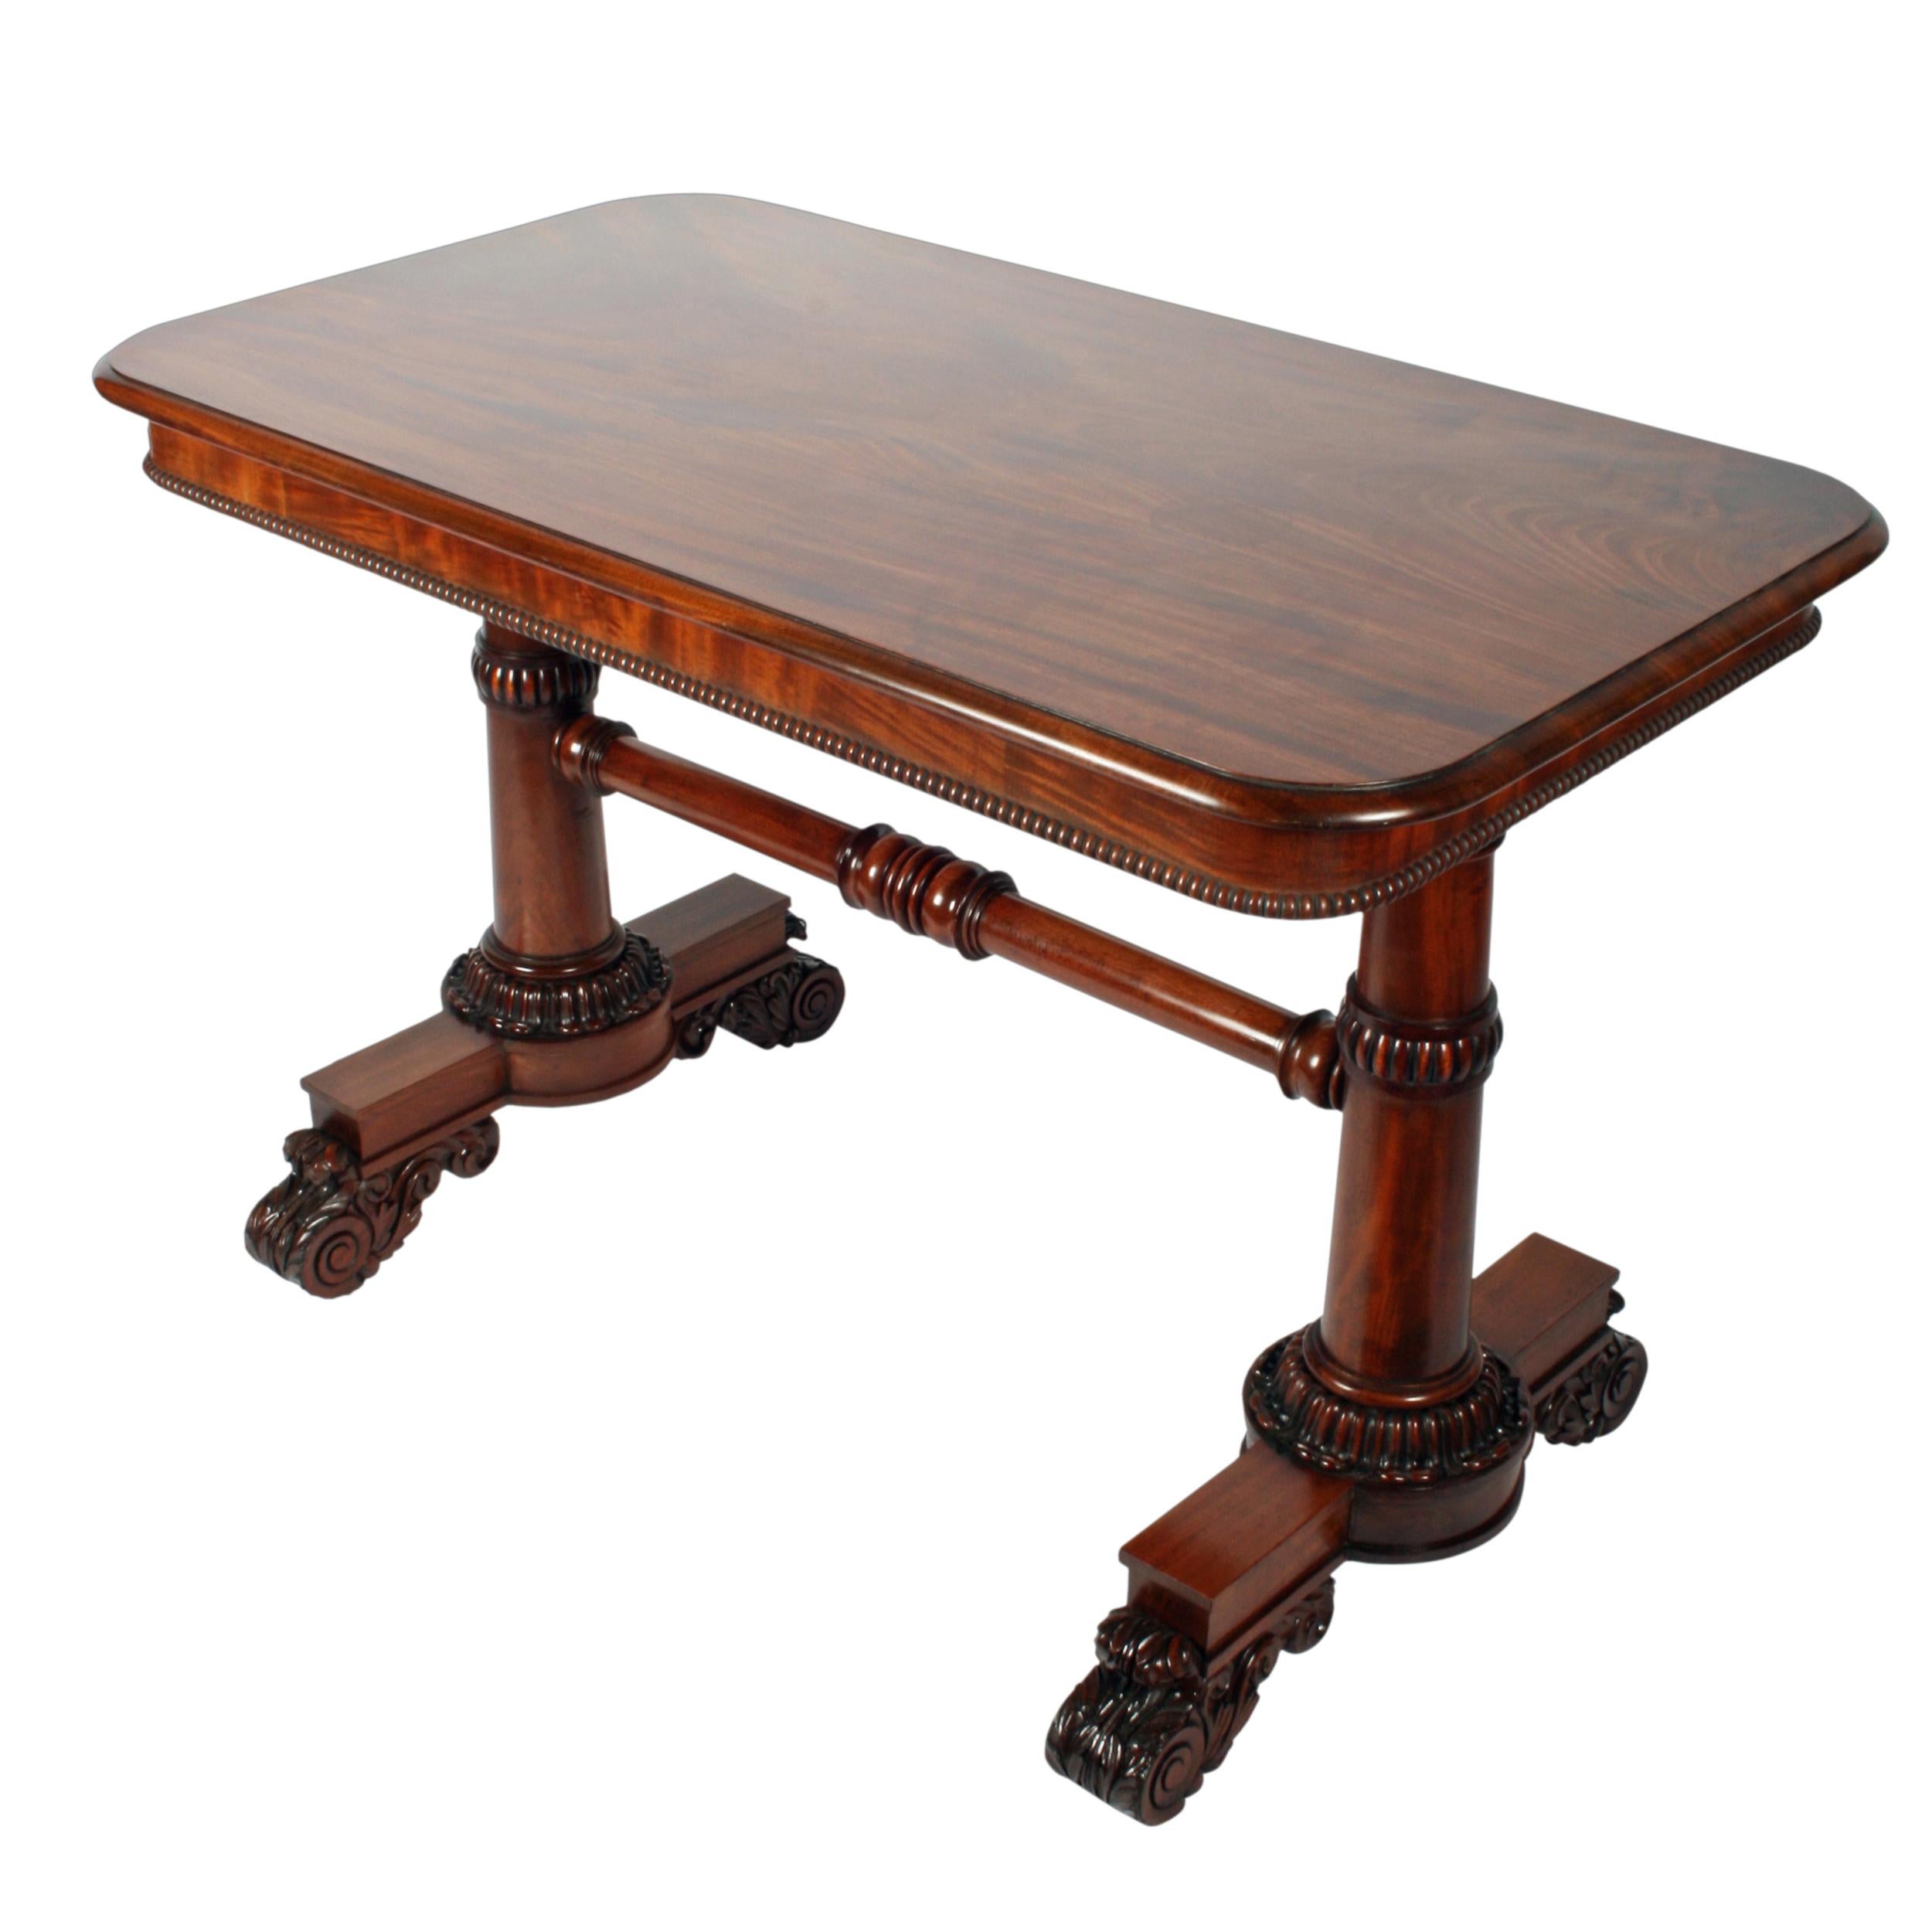 An early 19th century George IV mahogany library table.

The table has twin platform bases with concealed casters and a one piece mahogany top that has a shallow frieze and a pea beaded edge.

The platform supports are raised on carved scrolling